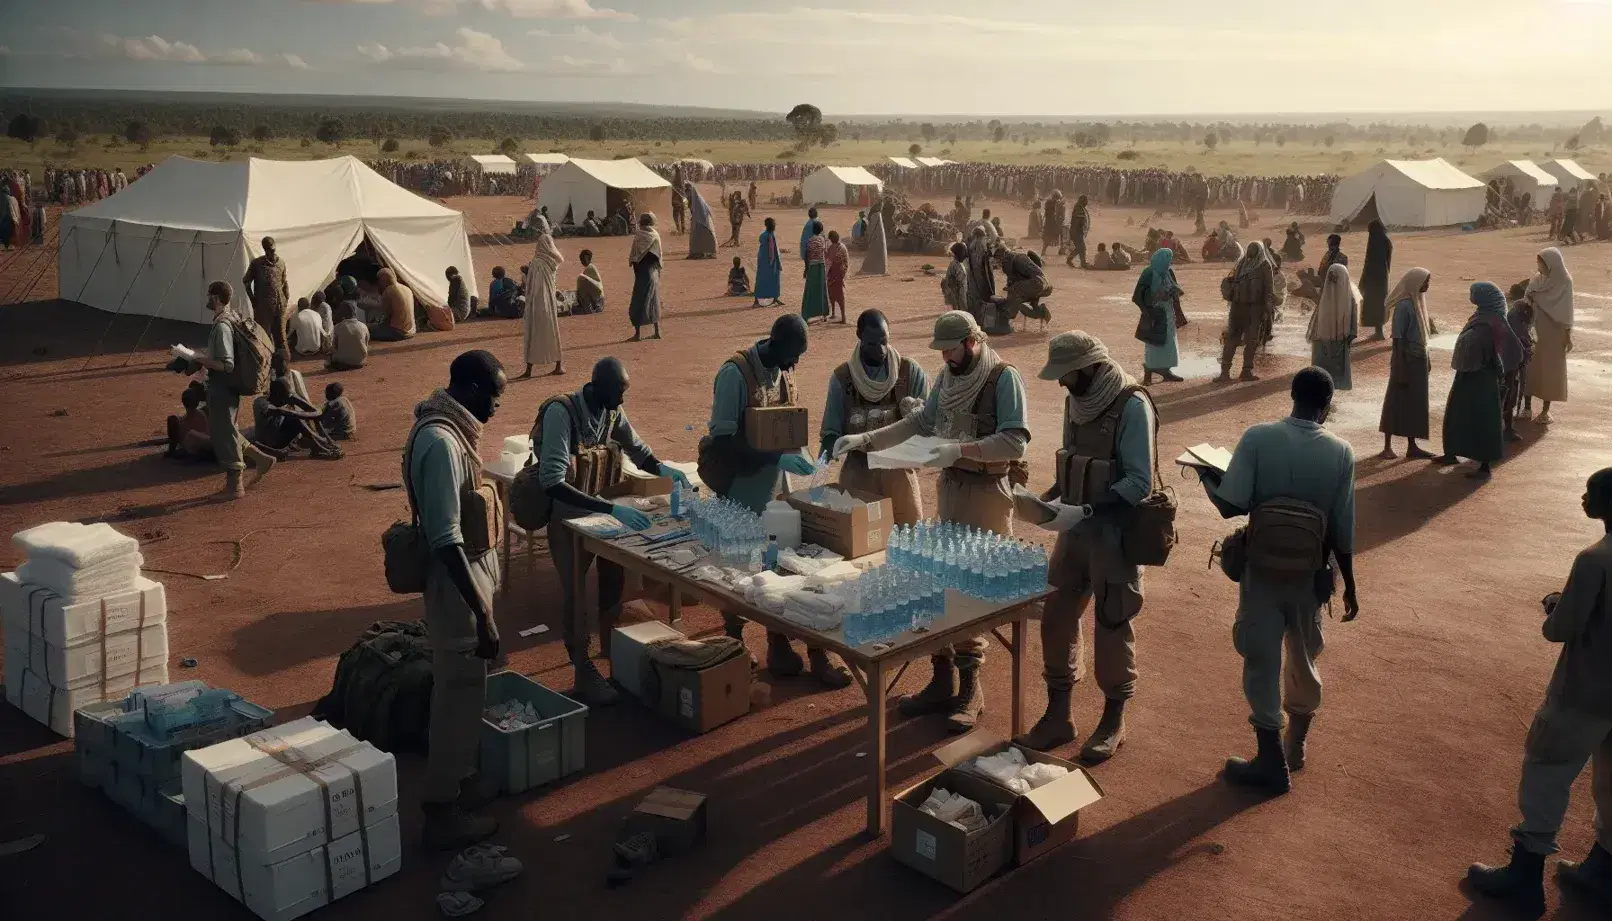 Humanitarian aid workers set up a tent, distribute water, and provide medical assistance in a field under a clear sky.